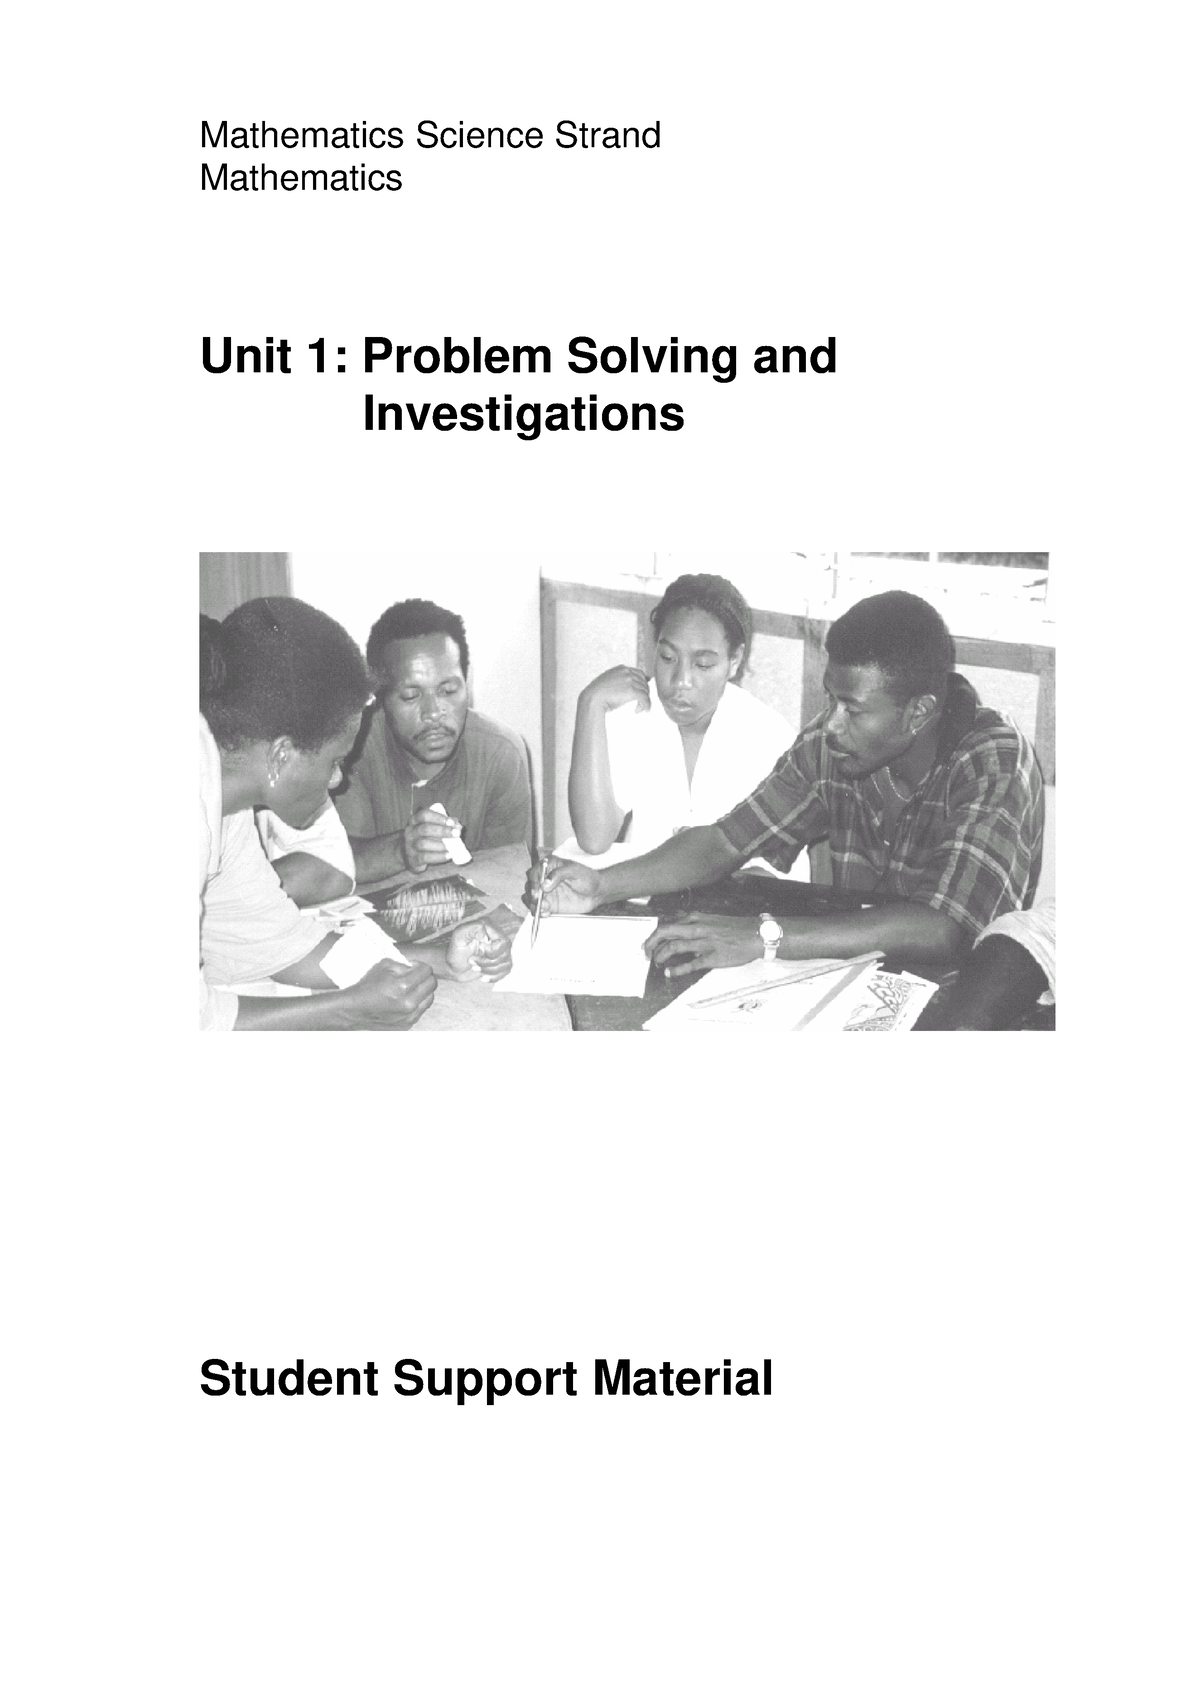 compare problem solving and mathematical investigation